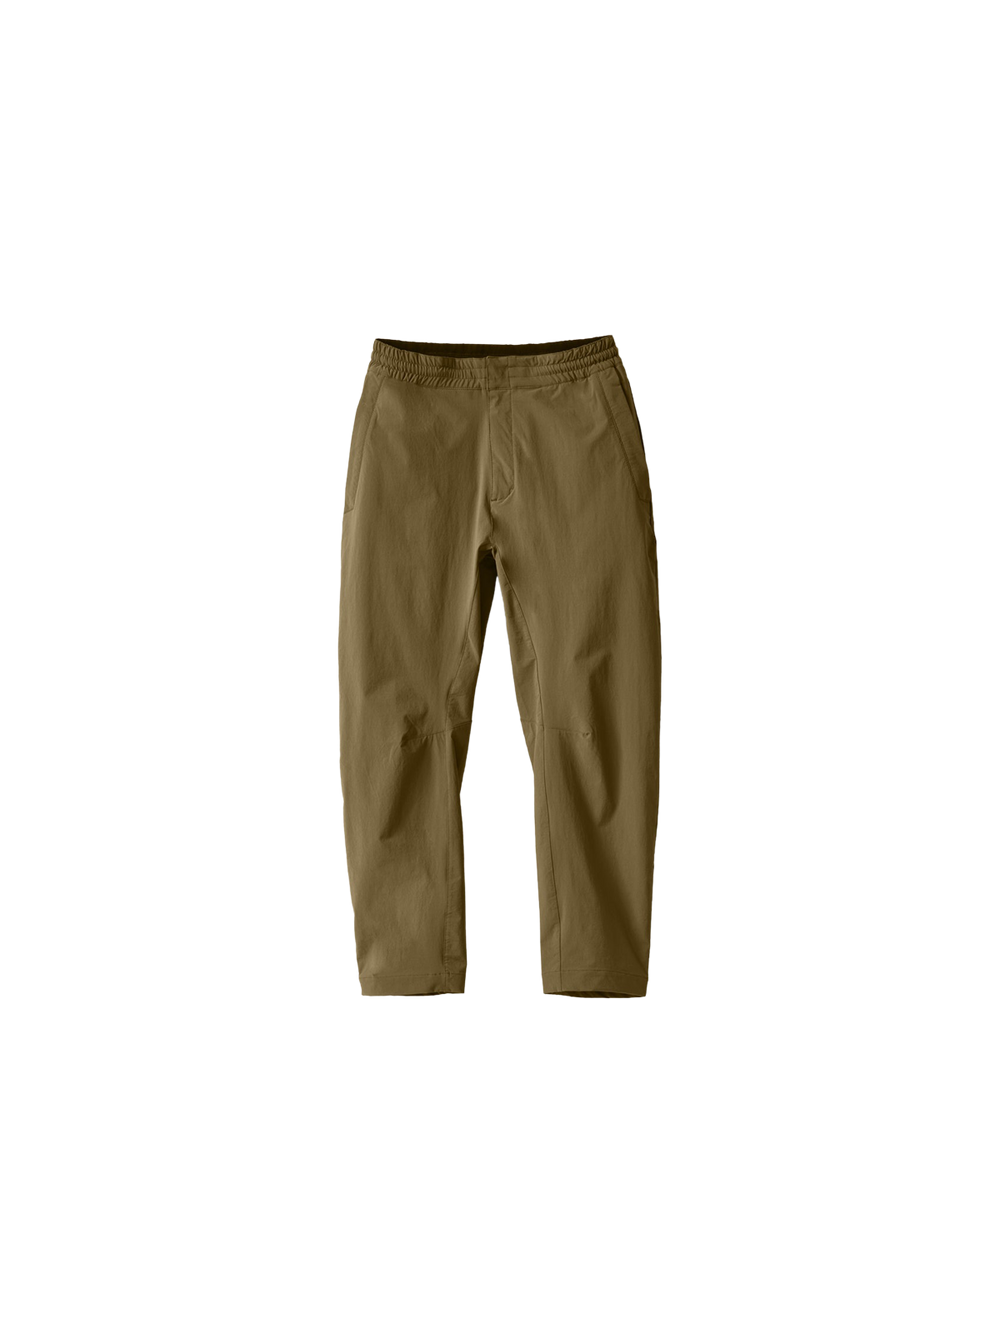 Product Image for Motion Pant